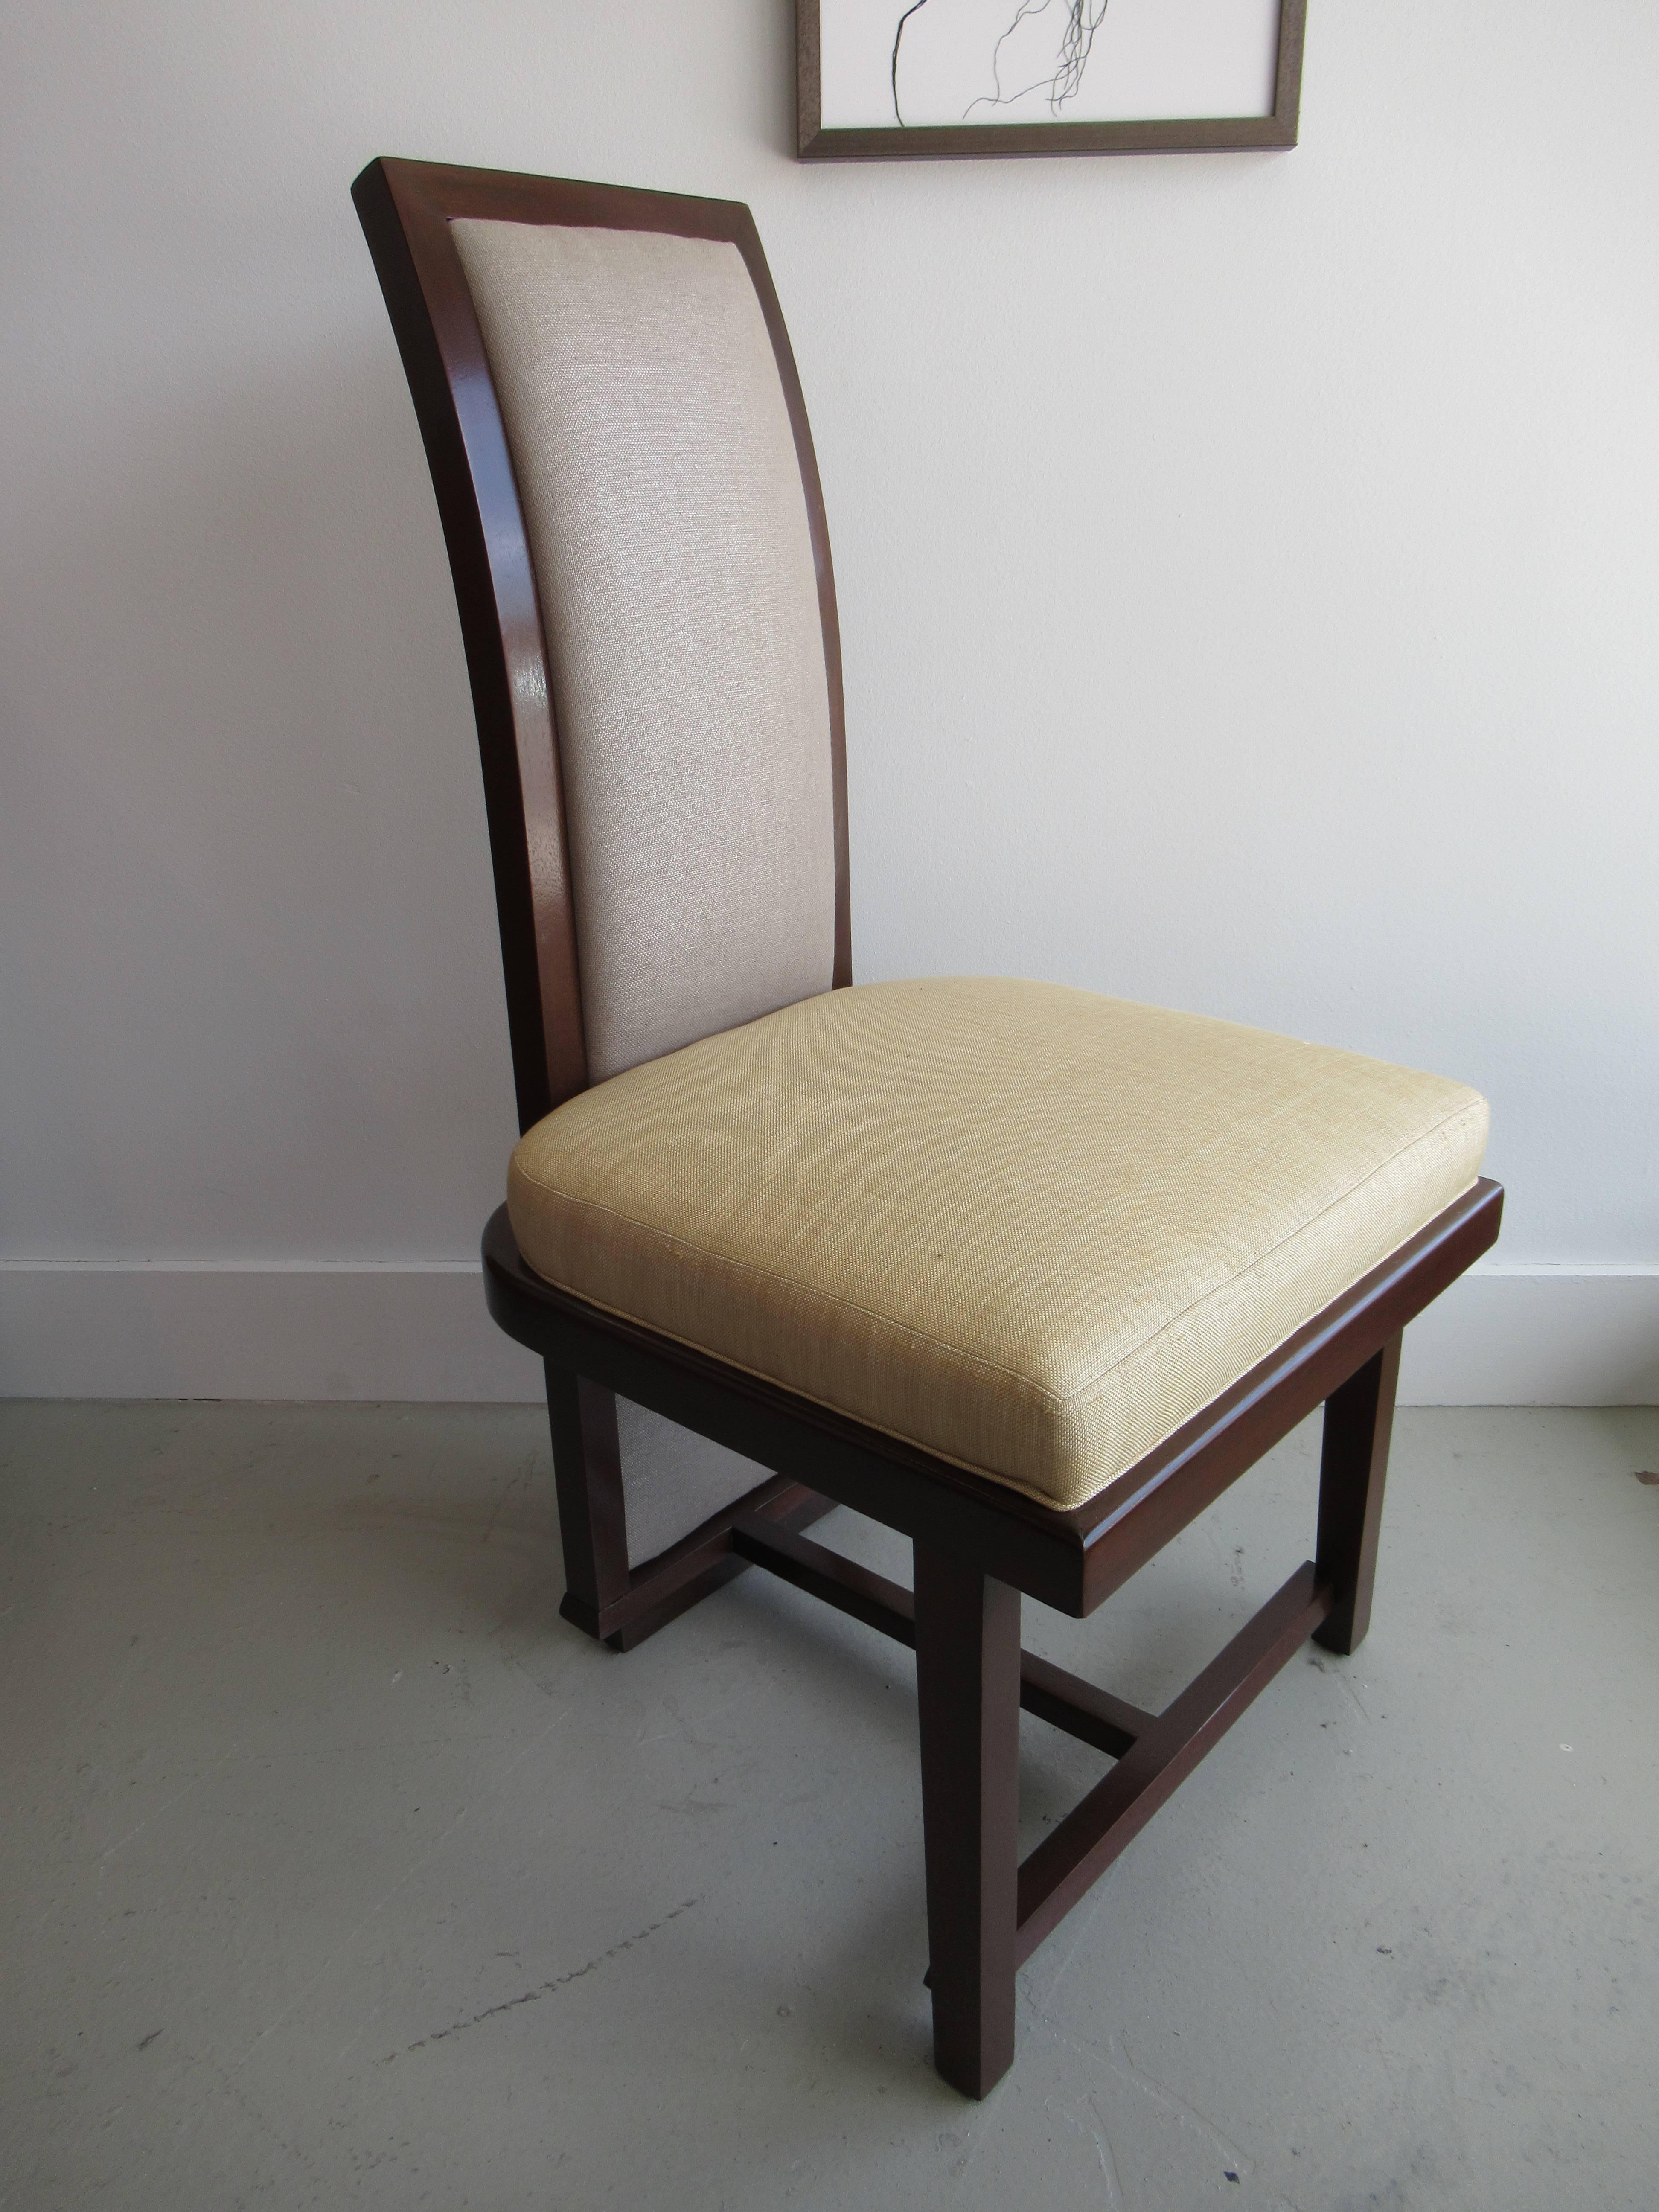 Mid-20th Century Set of 12 Frank Lloyd Wright Taliesin Collection Mahogany Dining Chairs For Sale